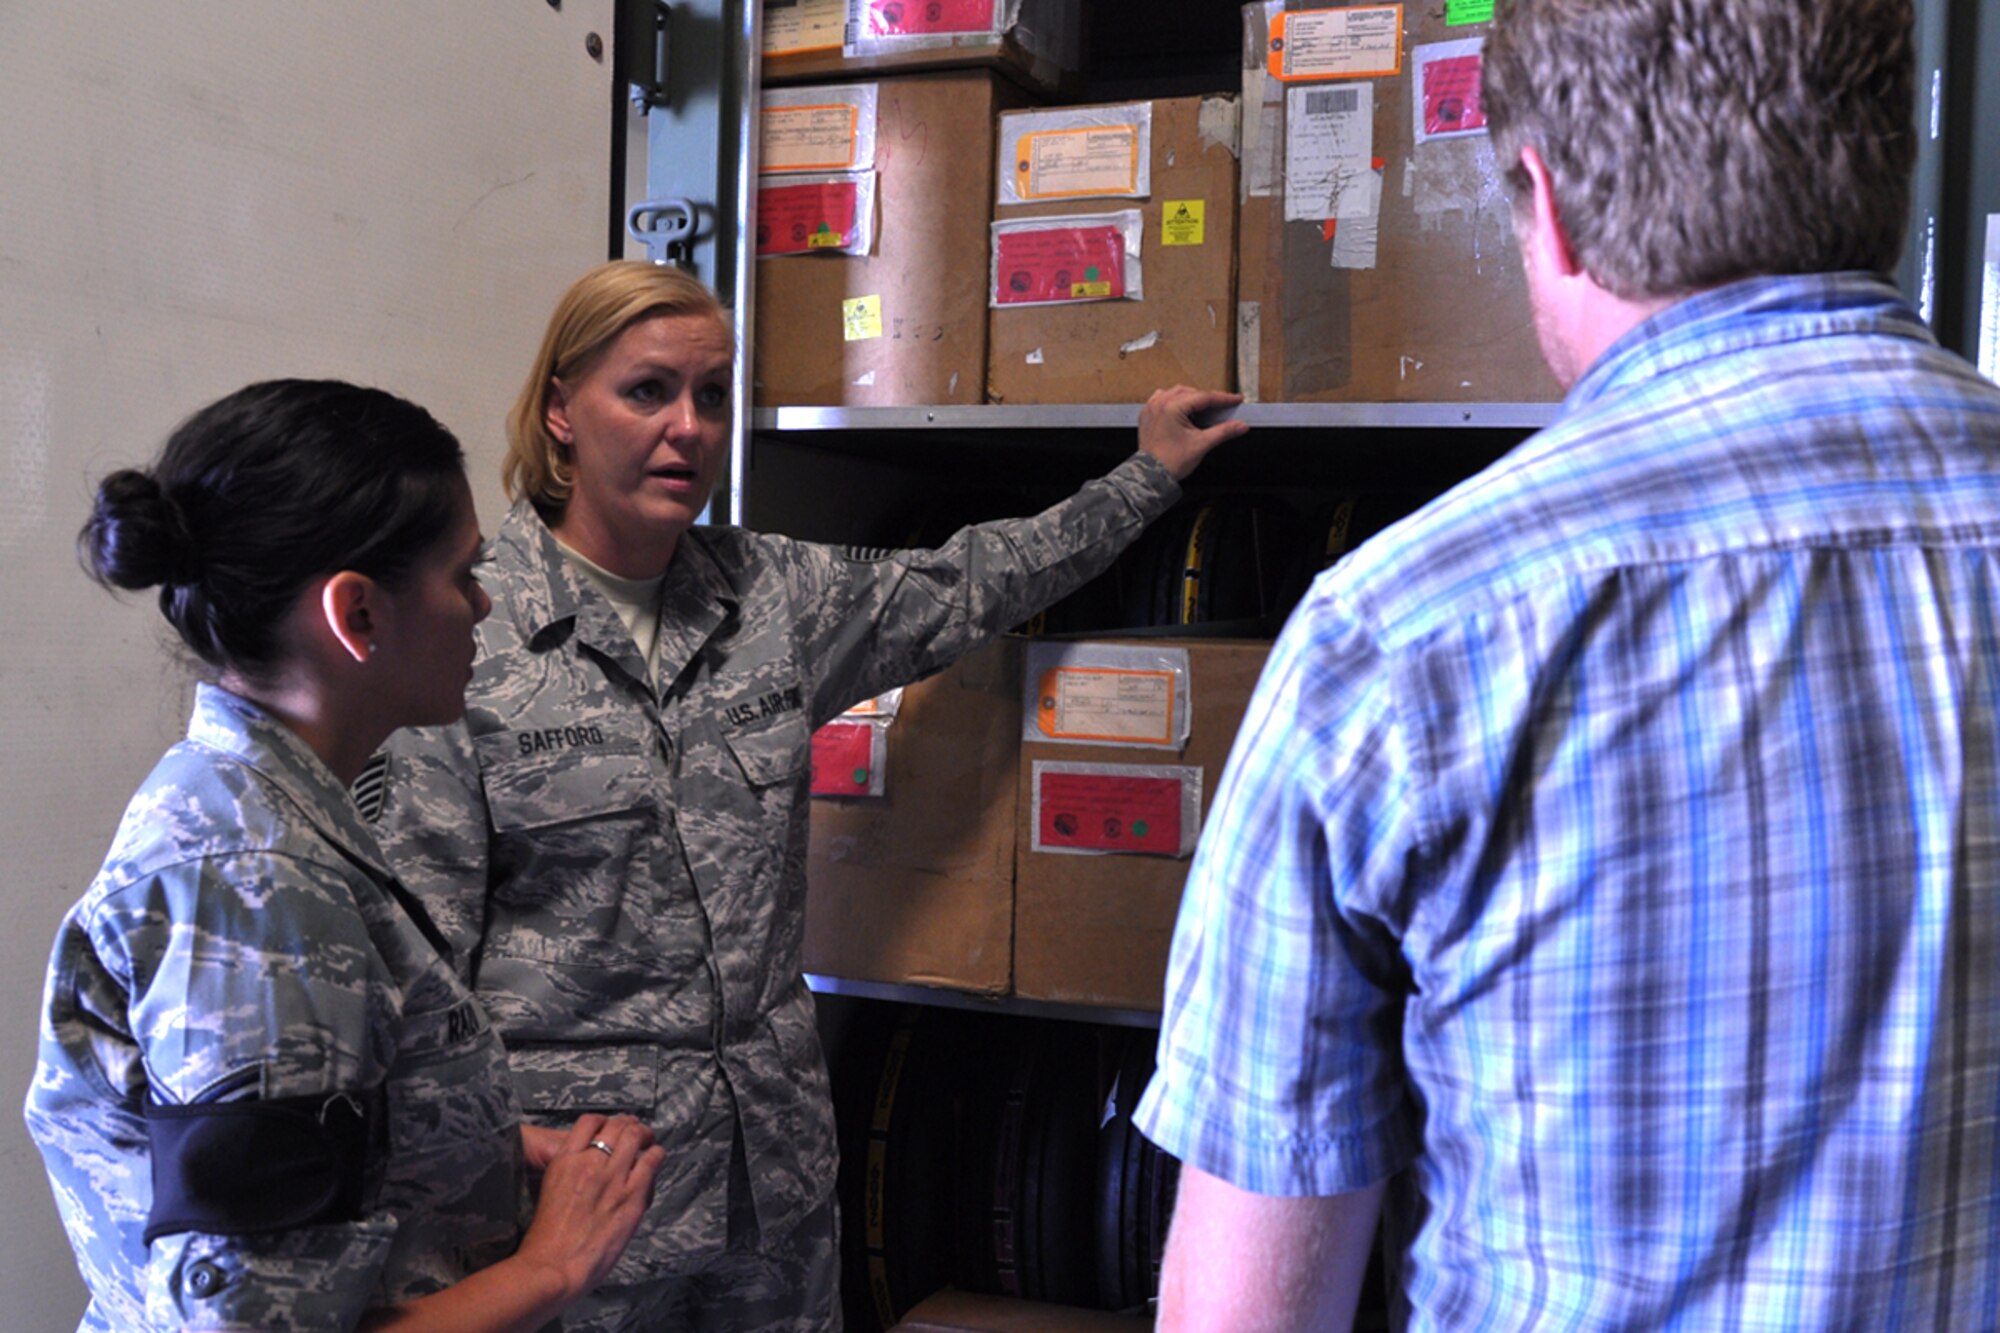 Tech. Sgt. Eileen Safford, the 419th Logistics Readiness Squadron’s maintenance supply liaison, and Senior Airman Edna Razo, also a supply troop, explain the supply system to Razo’s civilian employer, Nathan Anderson of Nucor Building Systems in Brigham City. Razo hosted Anderson on a tour of her work area as part of Employer Appreciation Day activities Sunday. (U.S. Air Force photo/Staff Sgt. Heather Skinkle)